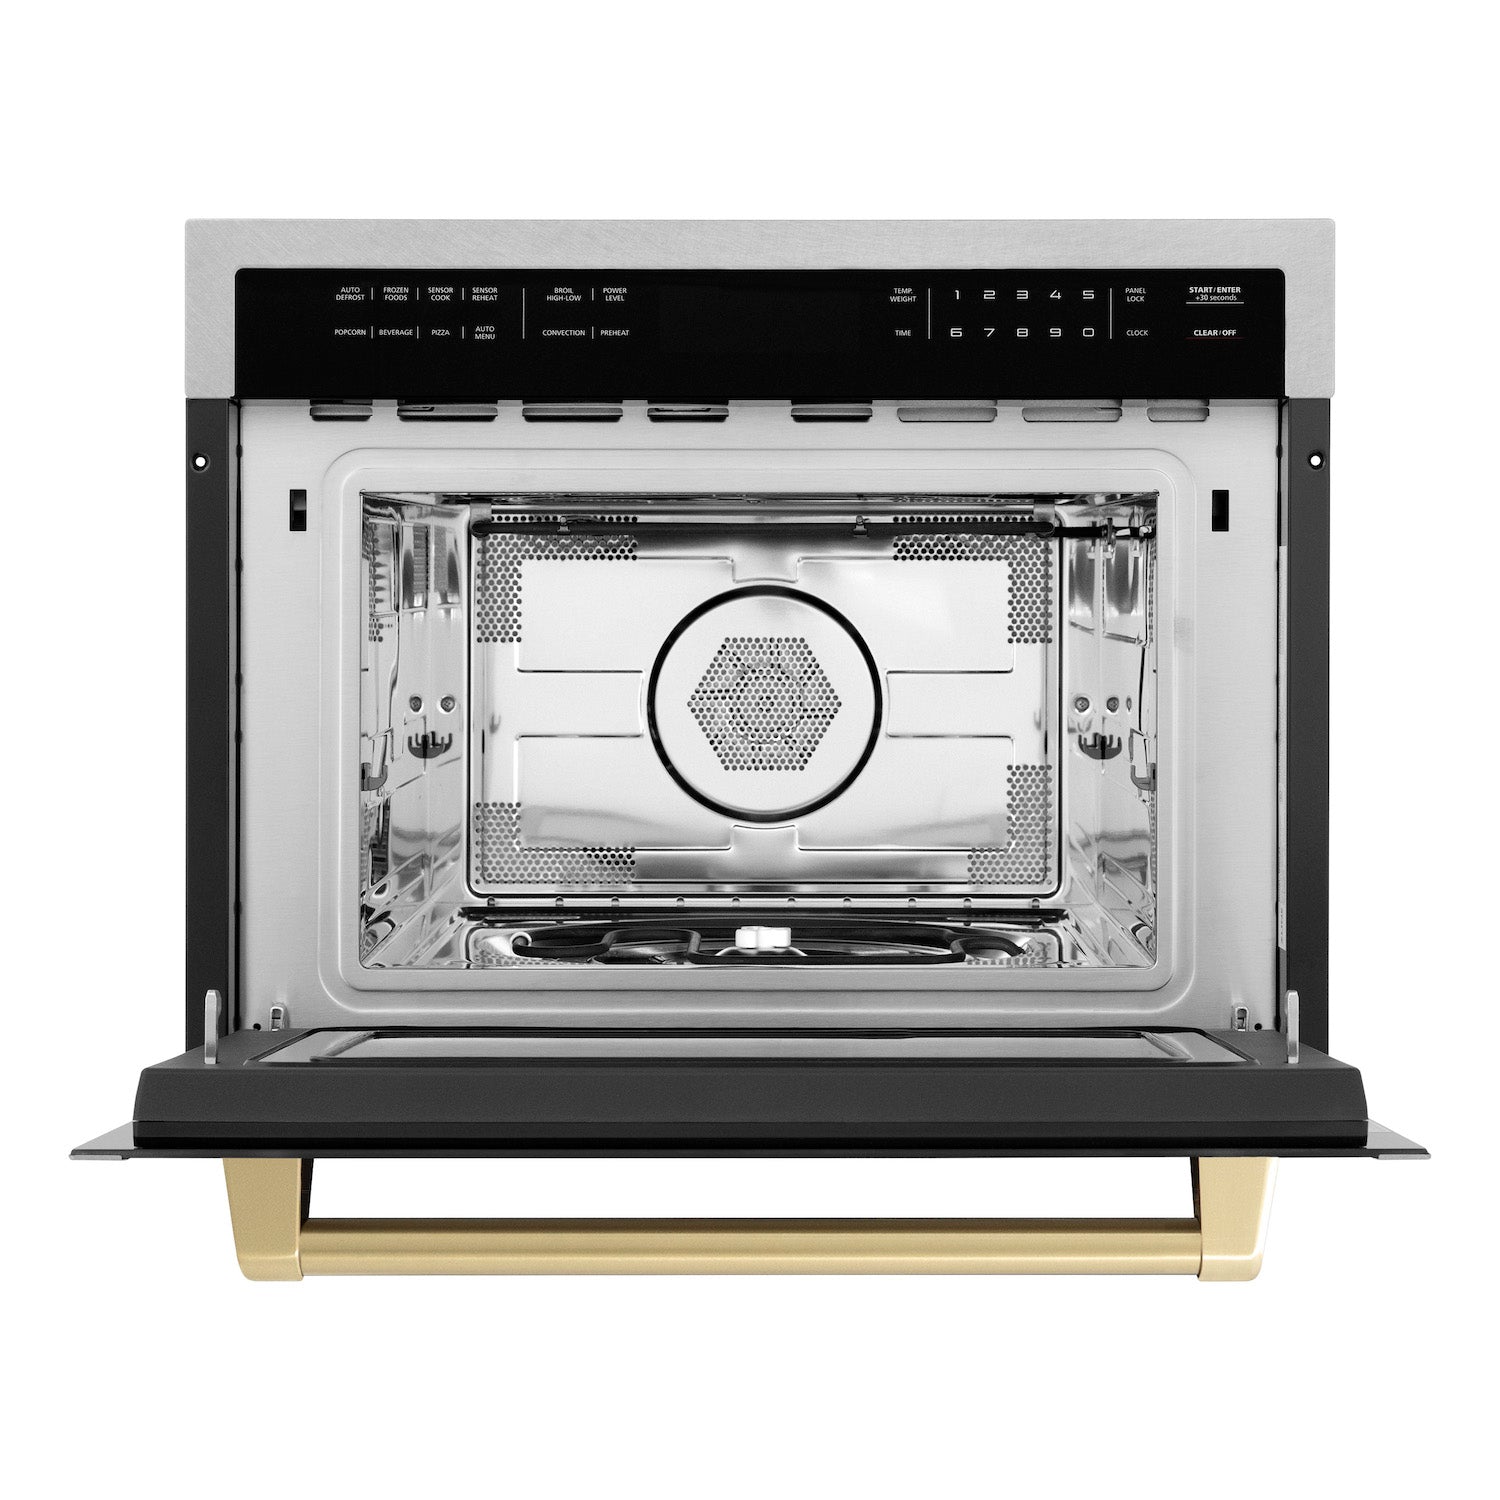 ZLINE Autograph Edition 24 in. 1.6 cu ft. Built-in Convection Microwave Oven in DuraSnow Stainless Steel with Champagne Bronze Accents front with door open.